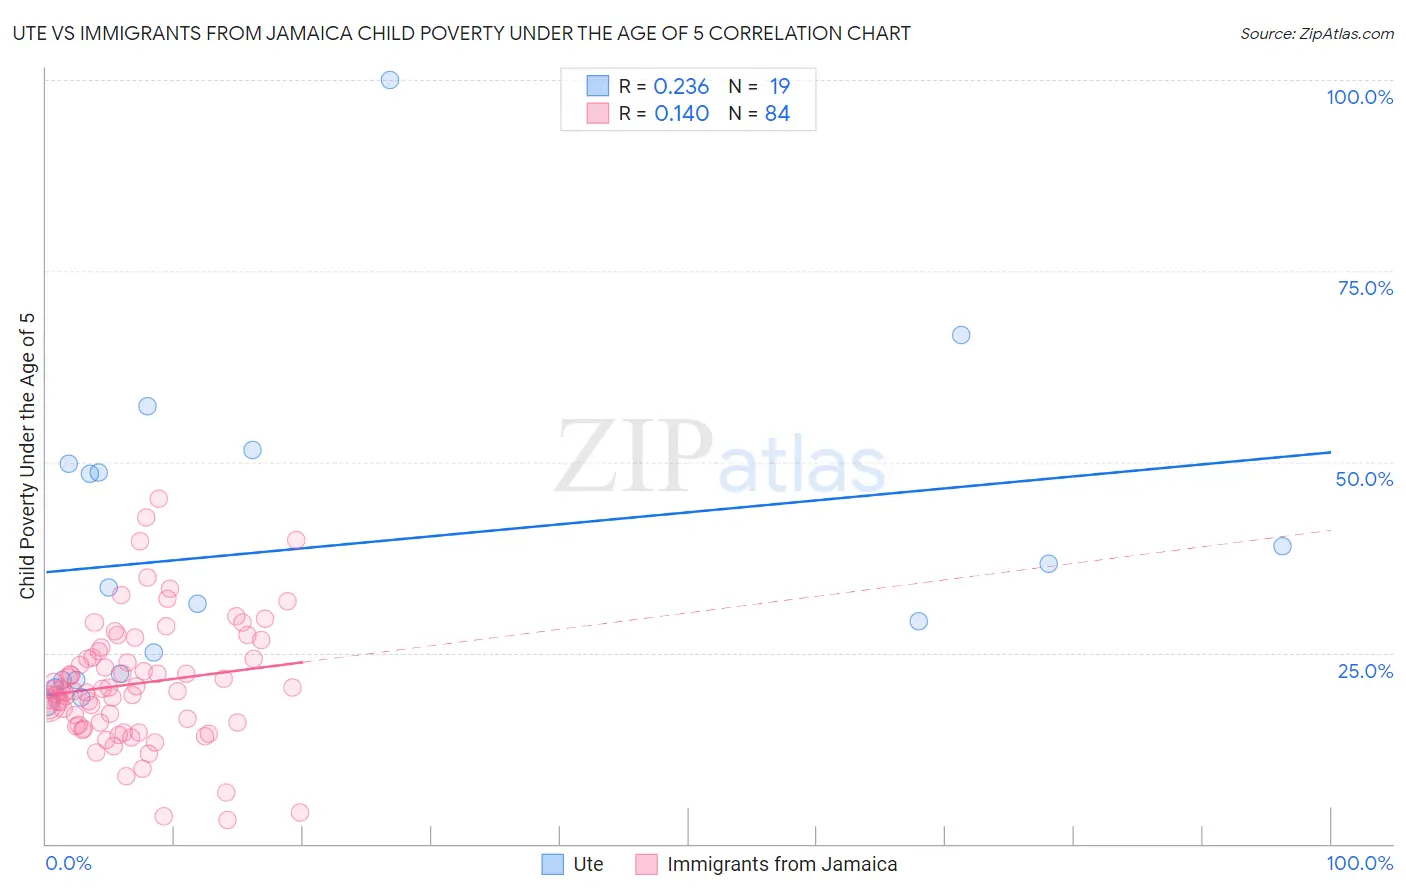 Ute vs Immigrants from Jamaica Child Poverty Under the Age of 5